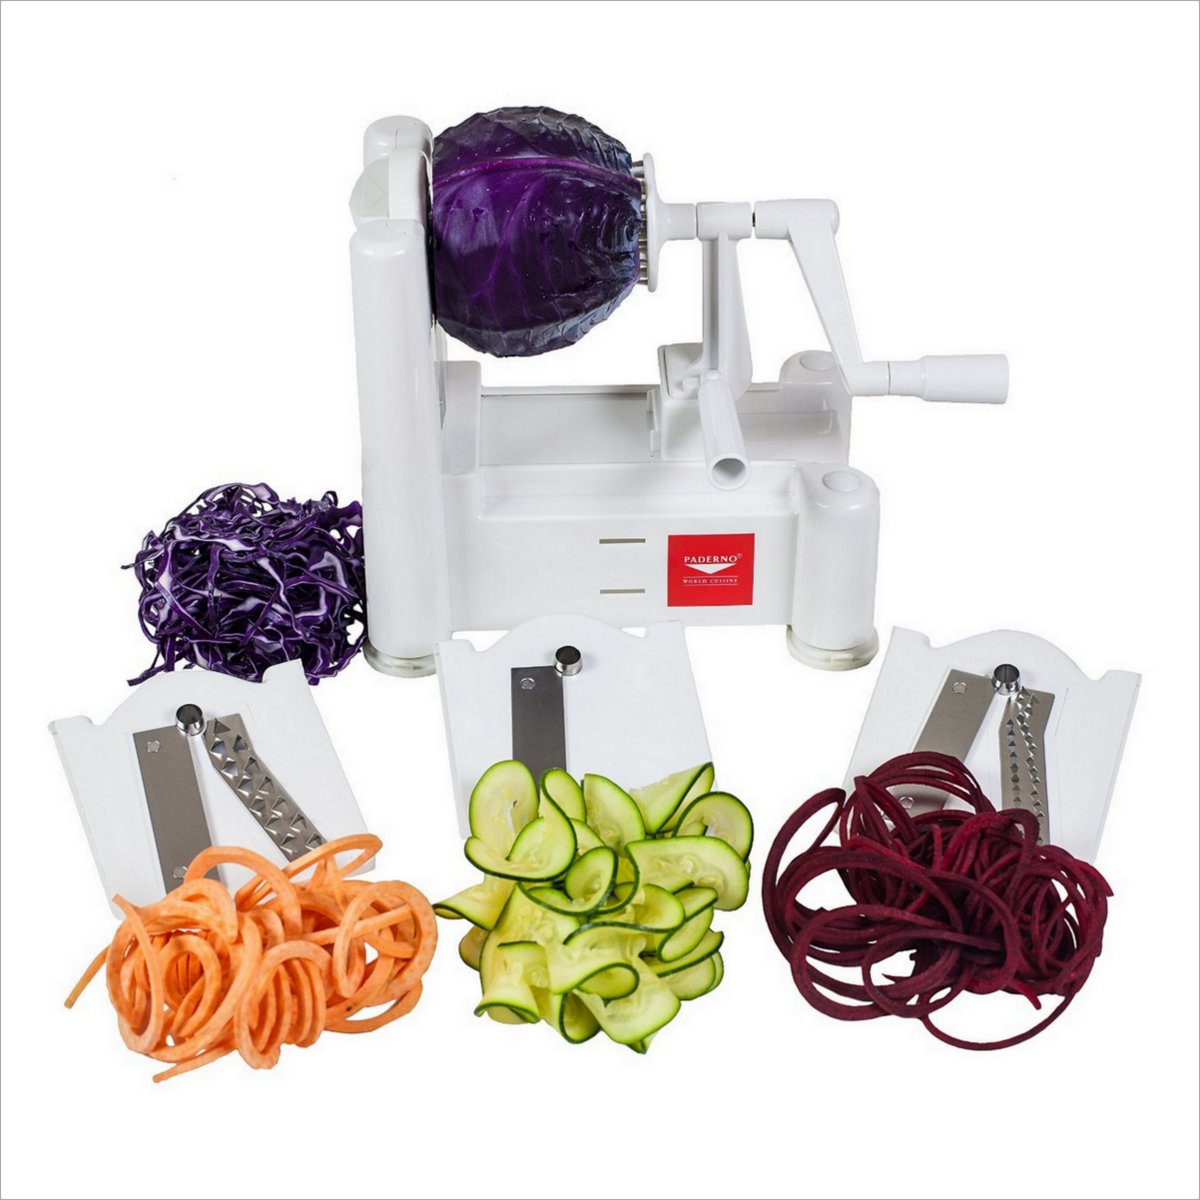 paderno spiralizer surrounded by spiralized veggies